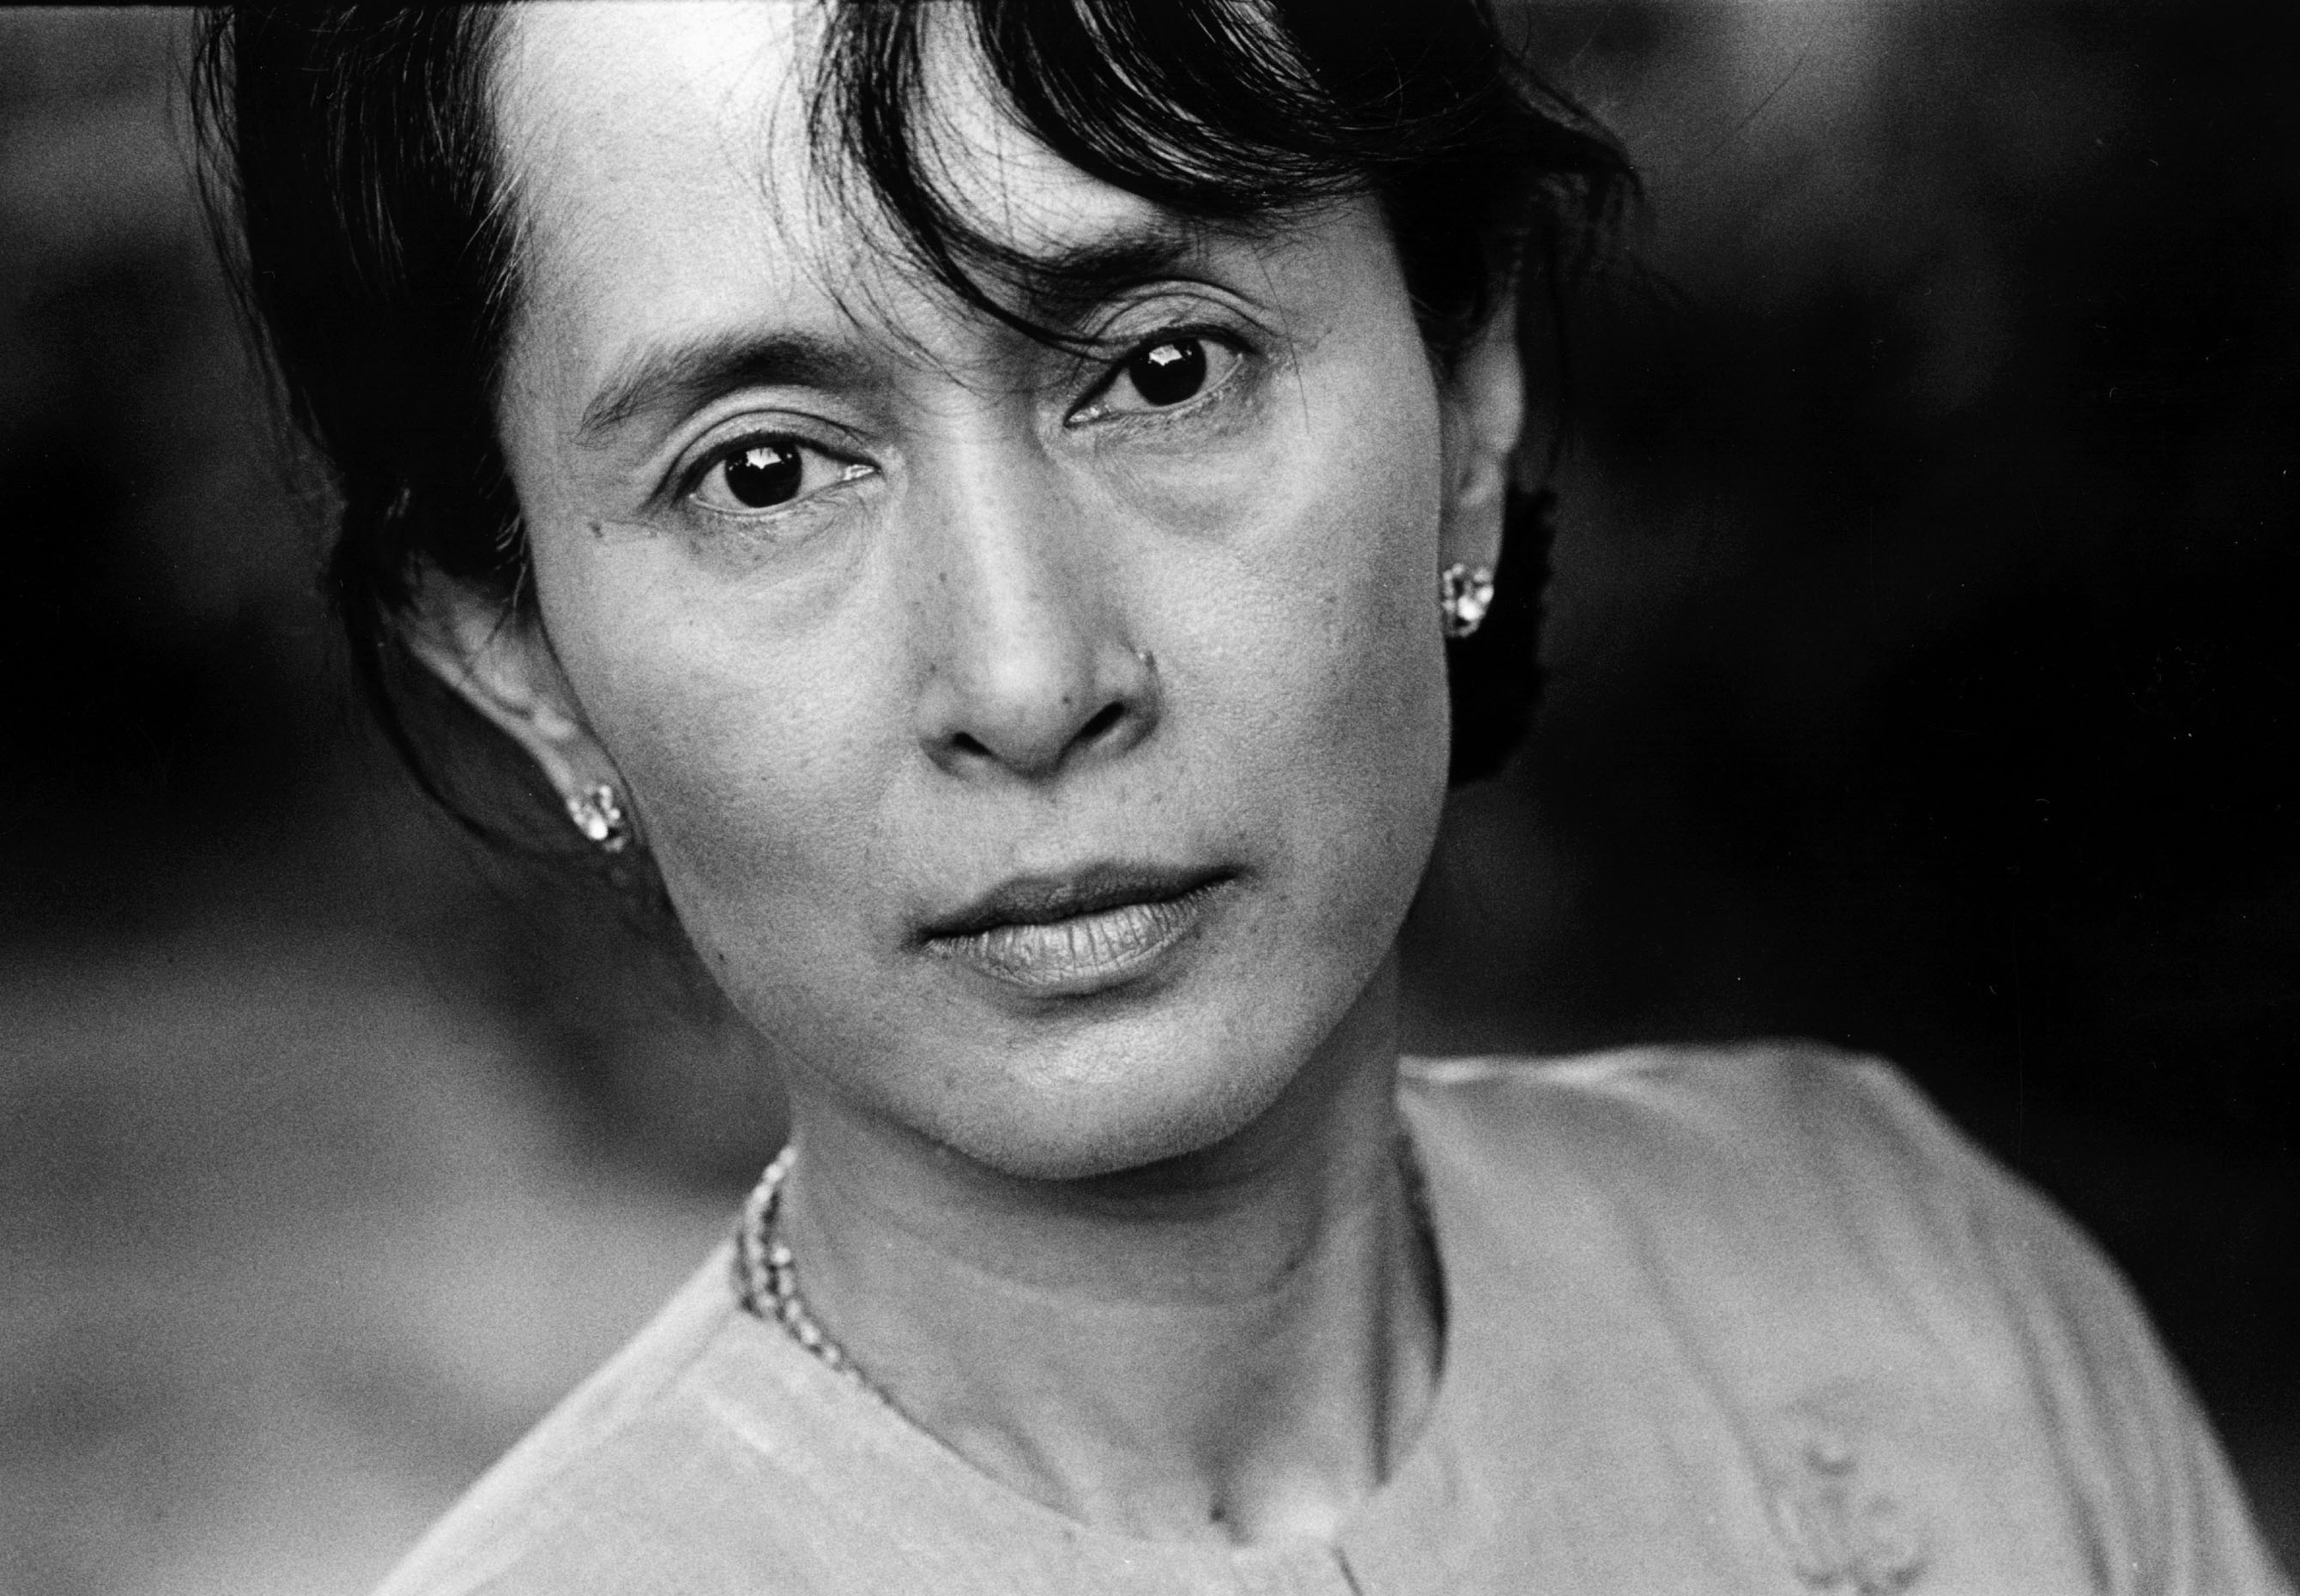 Ticket information for Daw Aung San Suu Kyi's lecture at UofL 